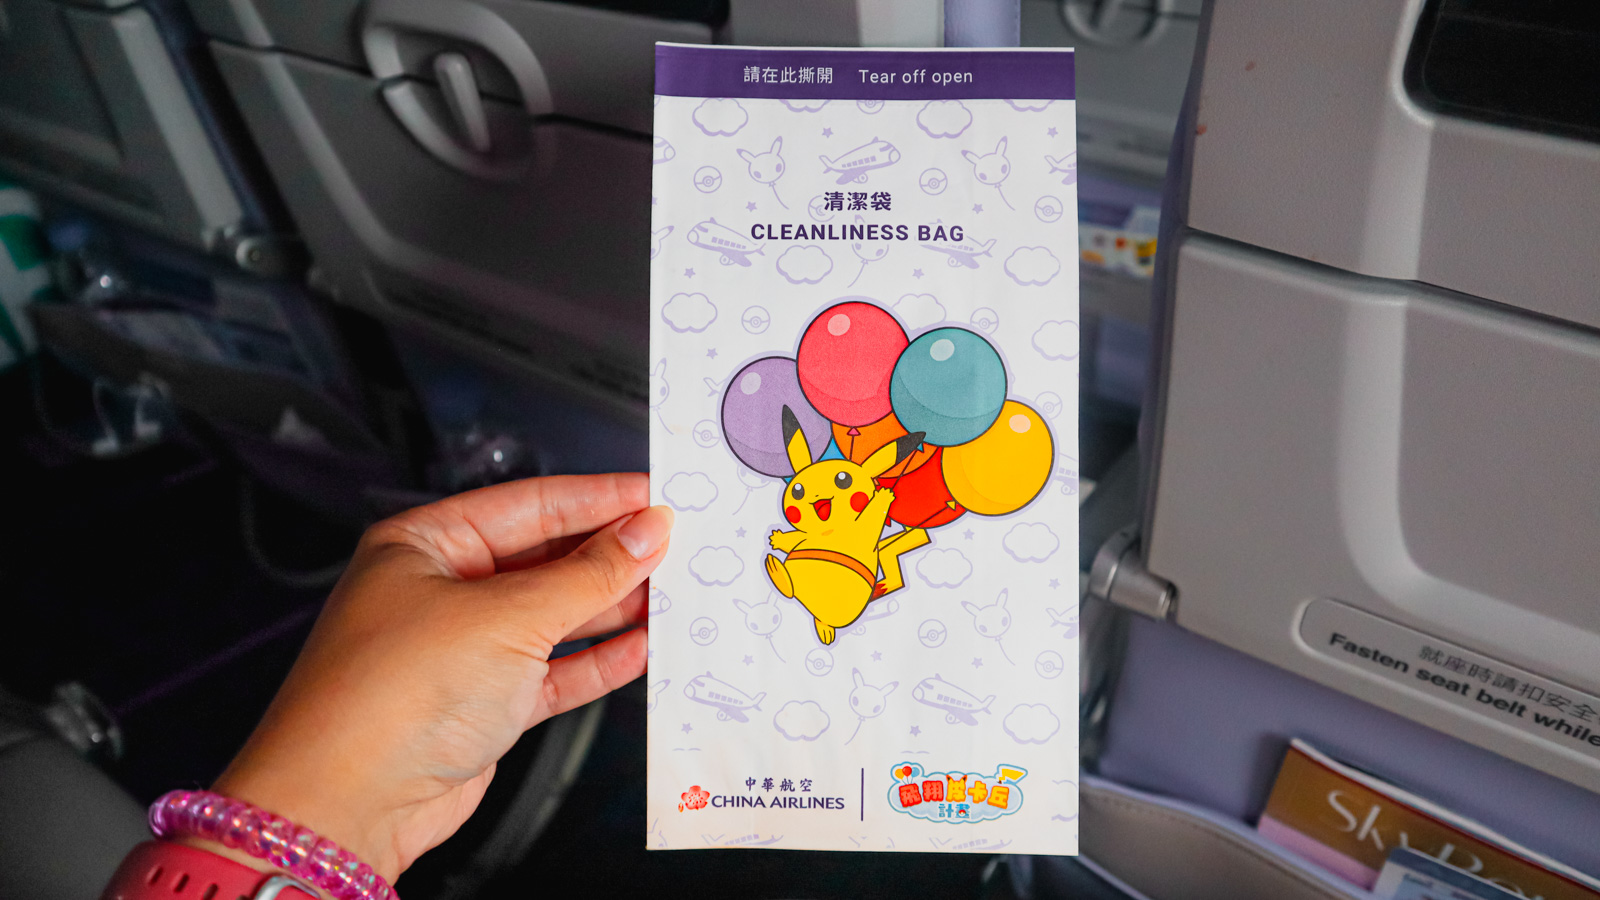 Cleanliness bag China Airlines Pikachu Jet